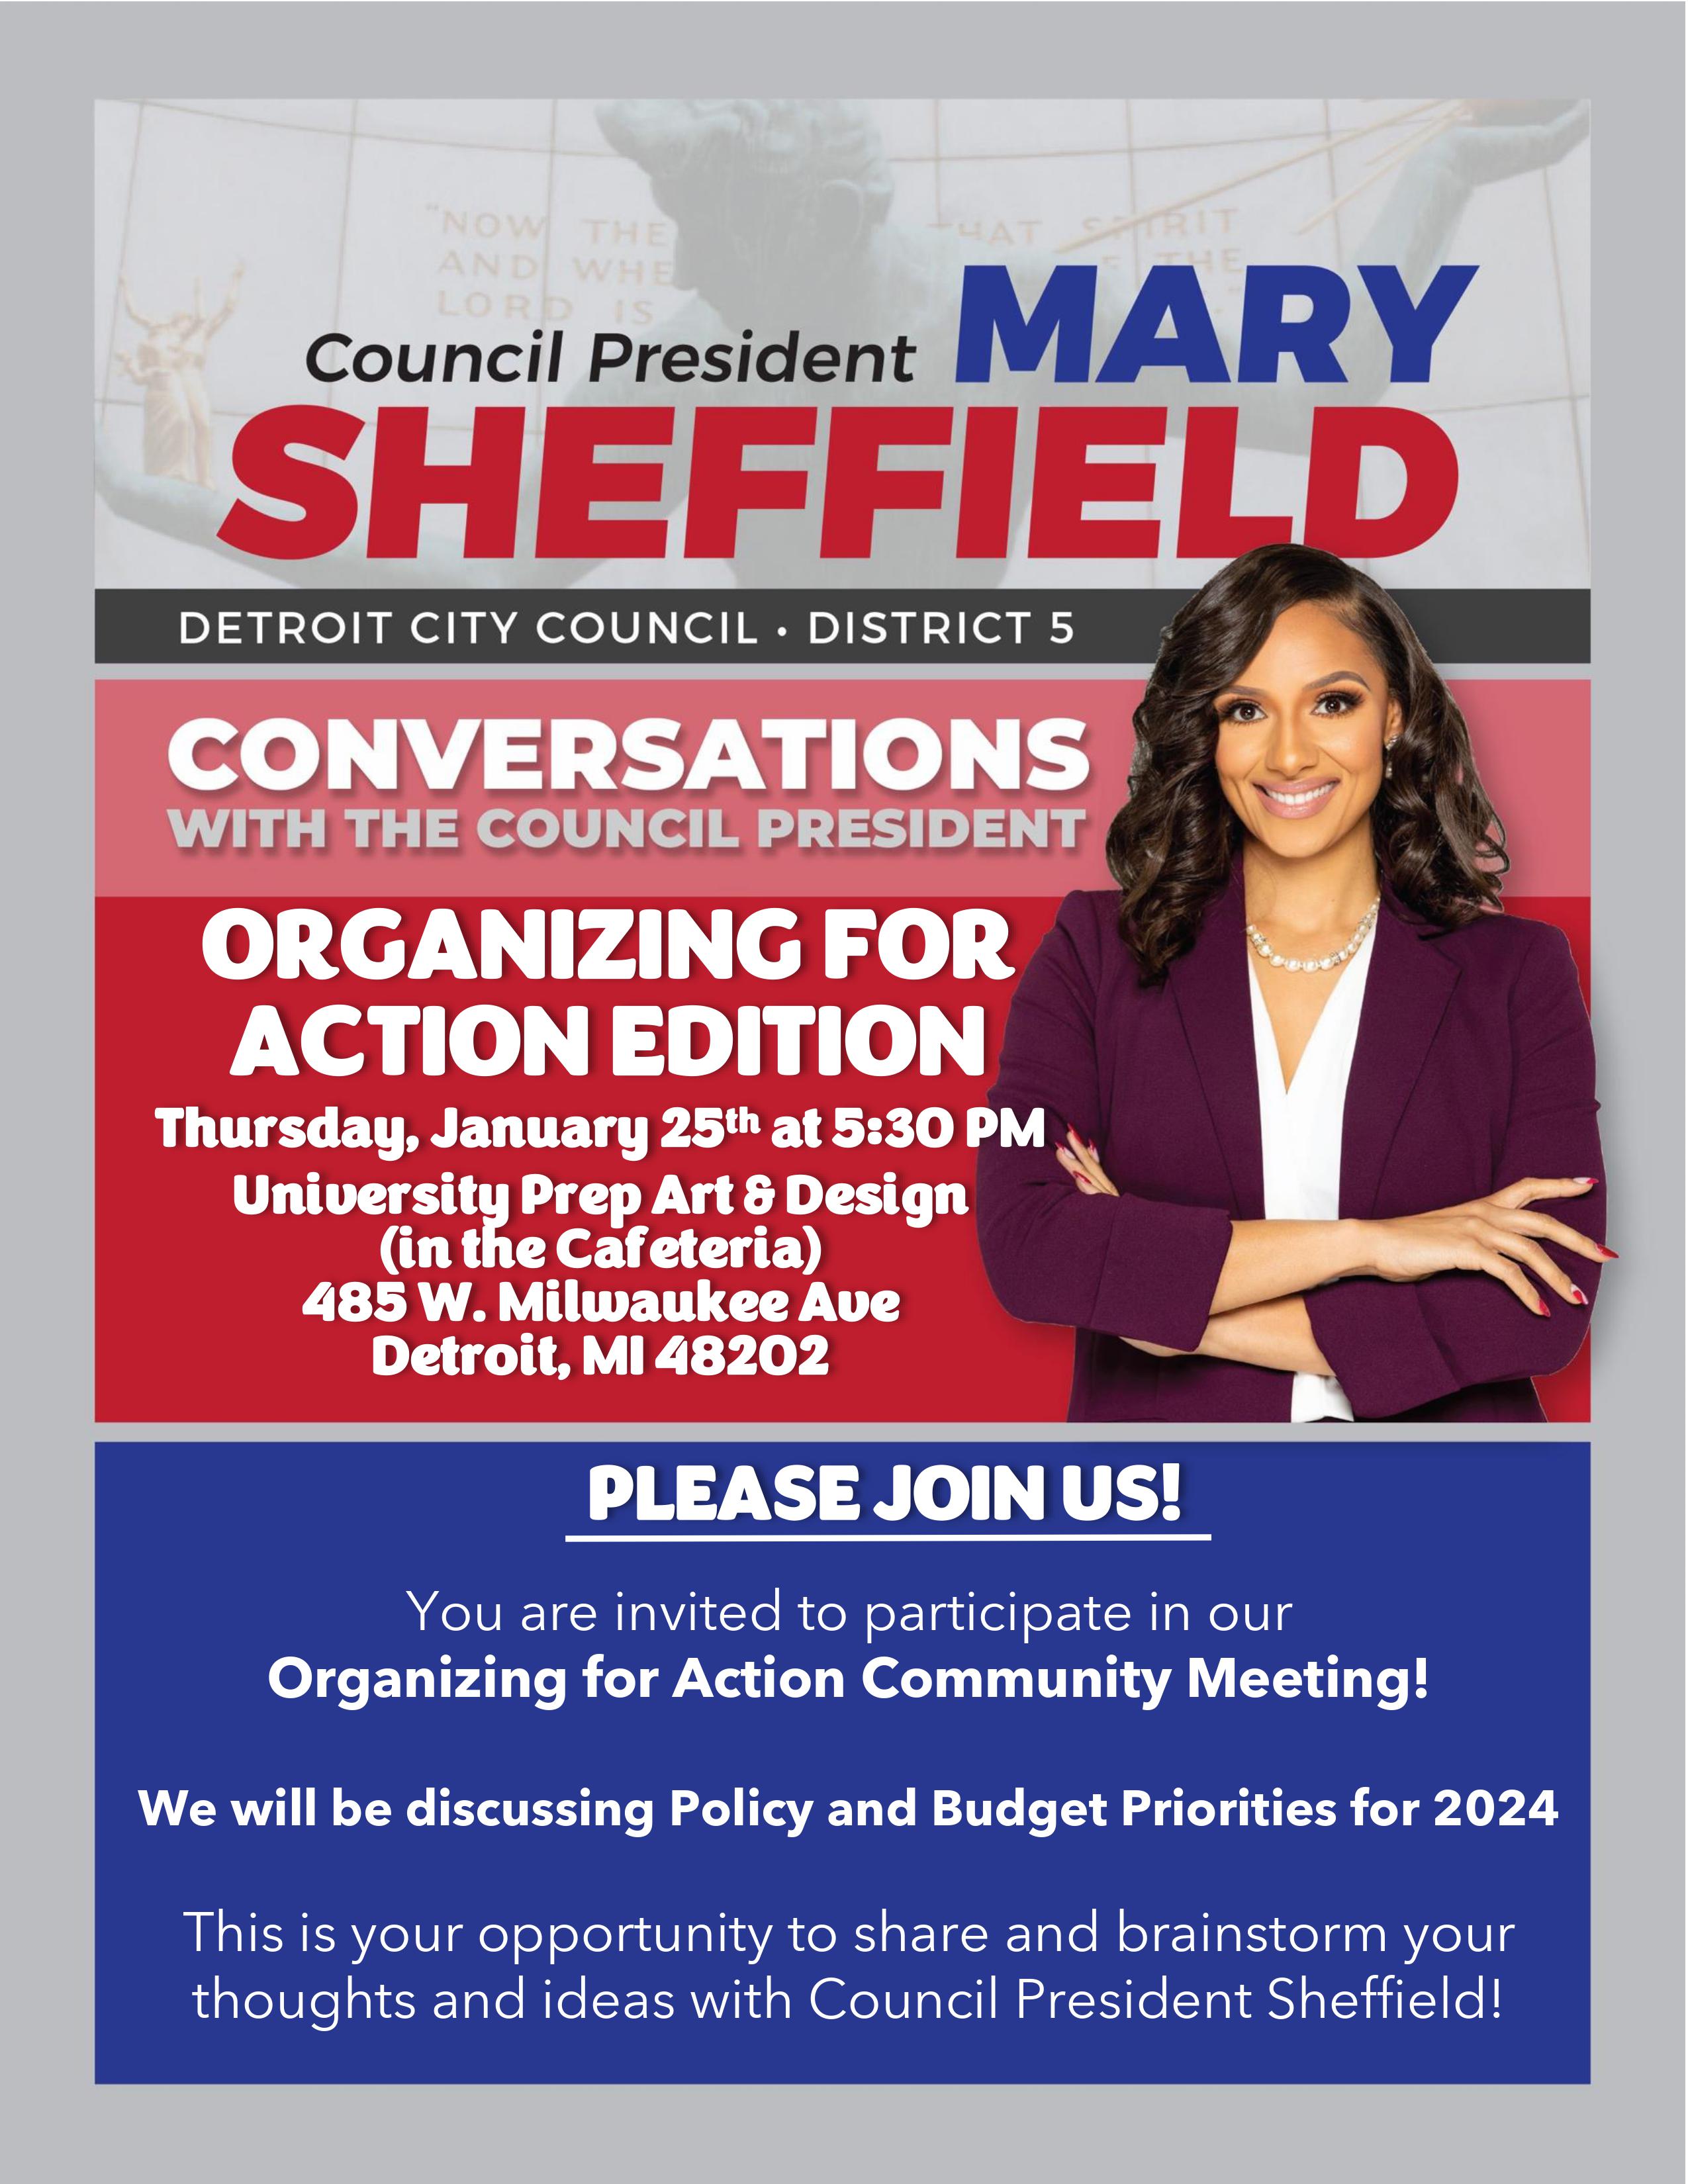 Council President Mary Sheffield to host Conversations with the Council President: Organizing for Action Edition on Thursday, January 25th at 5:30 pm